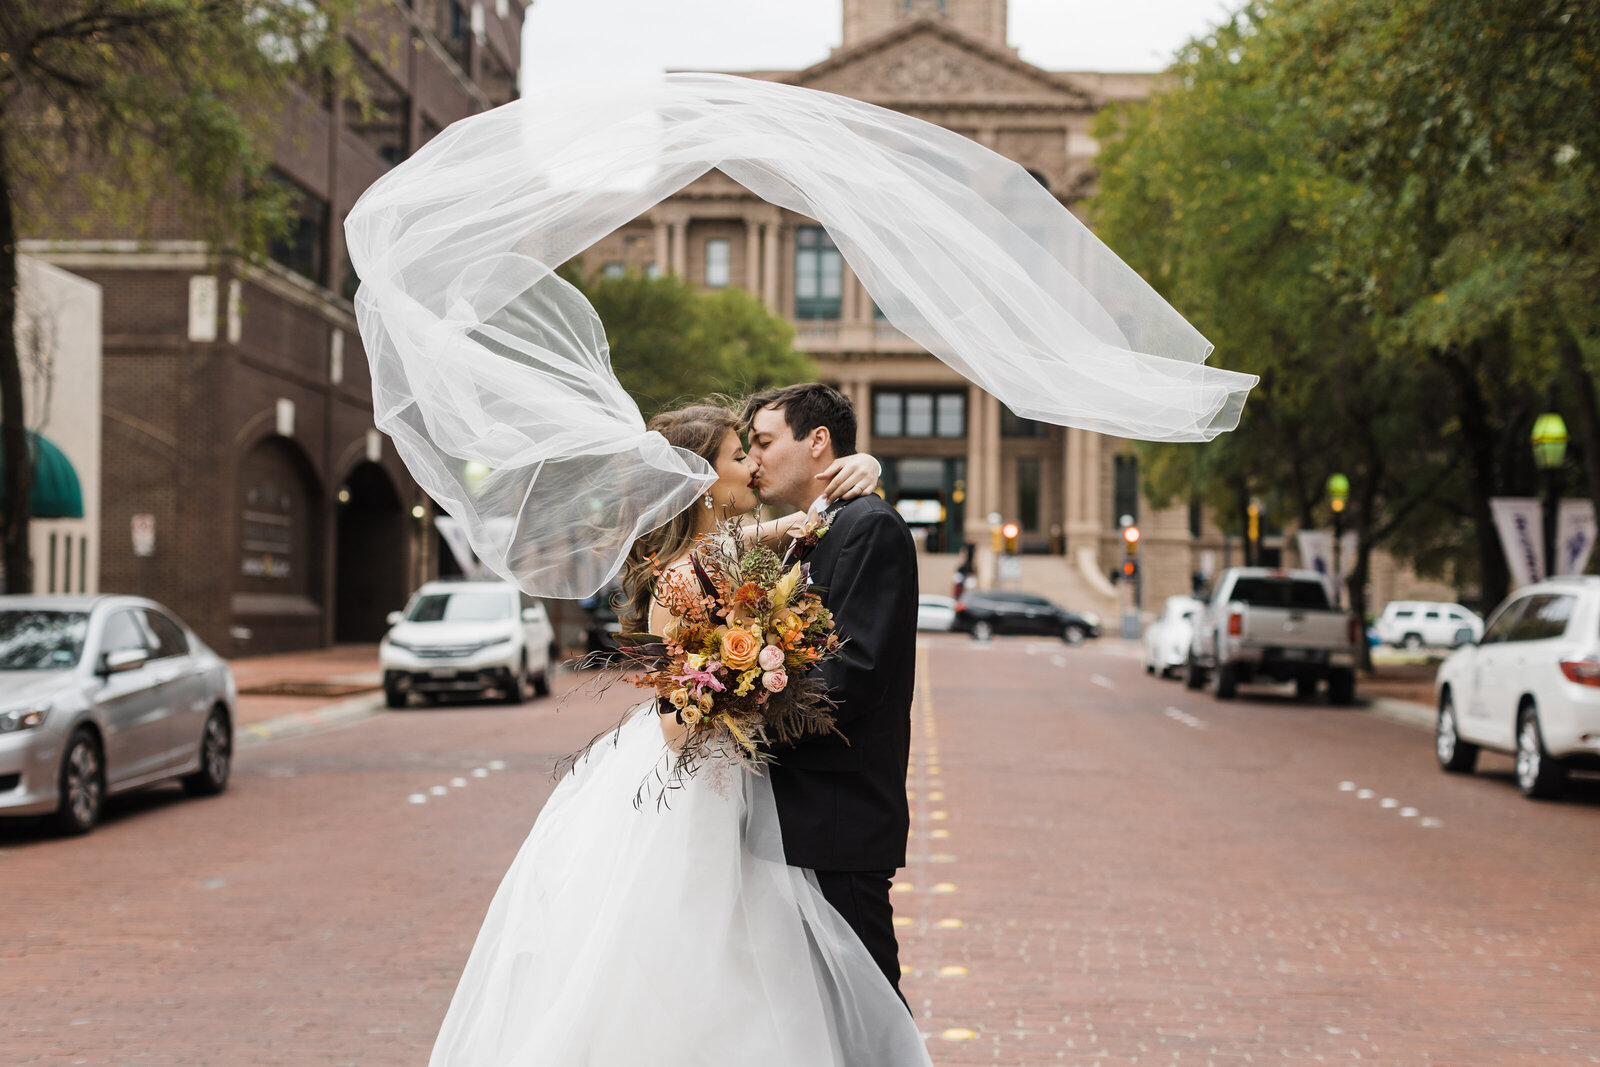 A bride and groom kiss in front of the Tarrant County Courthouse in downtown Fort Worth, TX. The bride's veil wraps around the couple and perfectly frames their faces in a circular motion. The bride is holding an orange, earthy bouquet, and a full white dress. The groom is in a black suit. It's a cloudy and windy day.